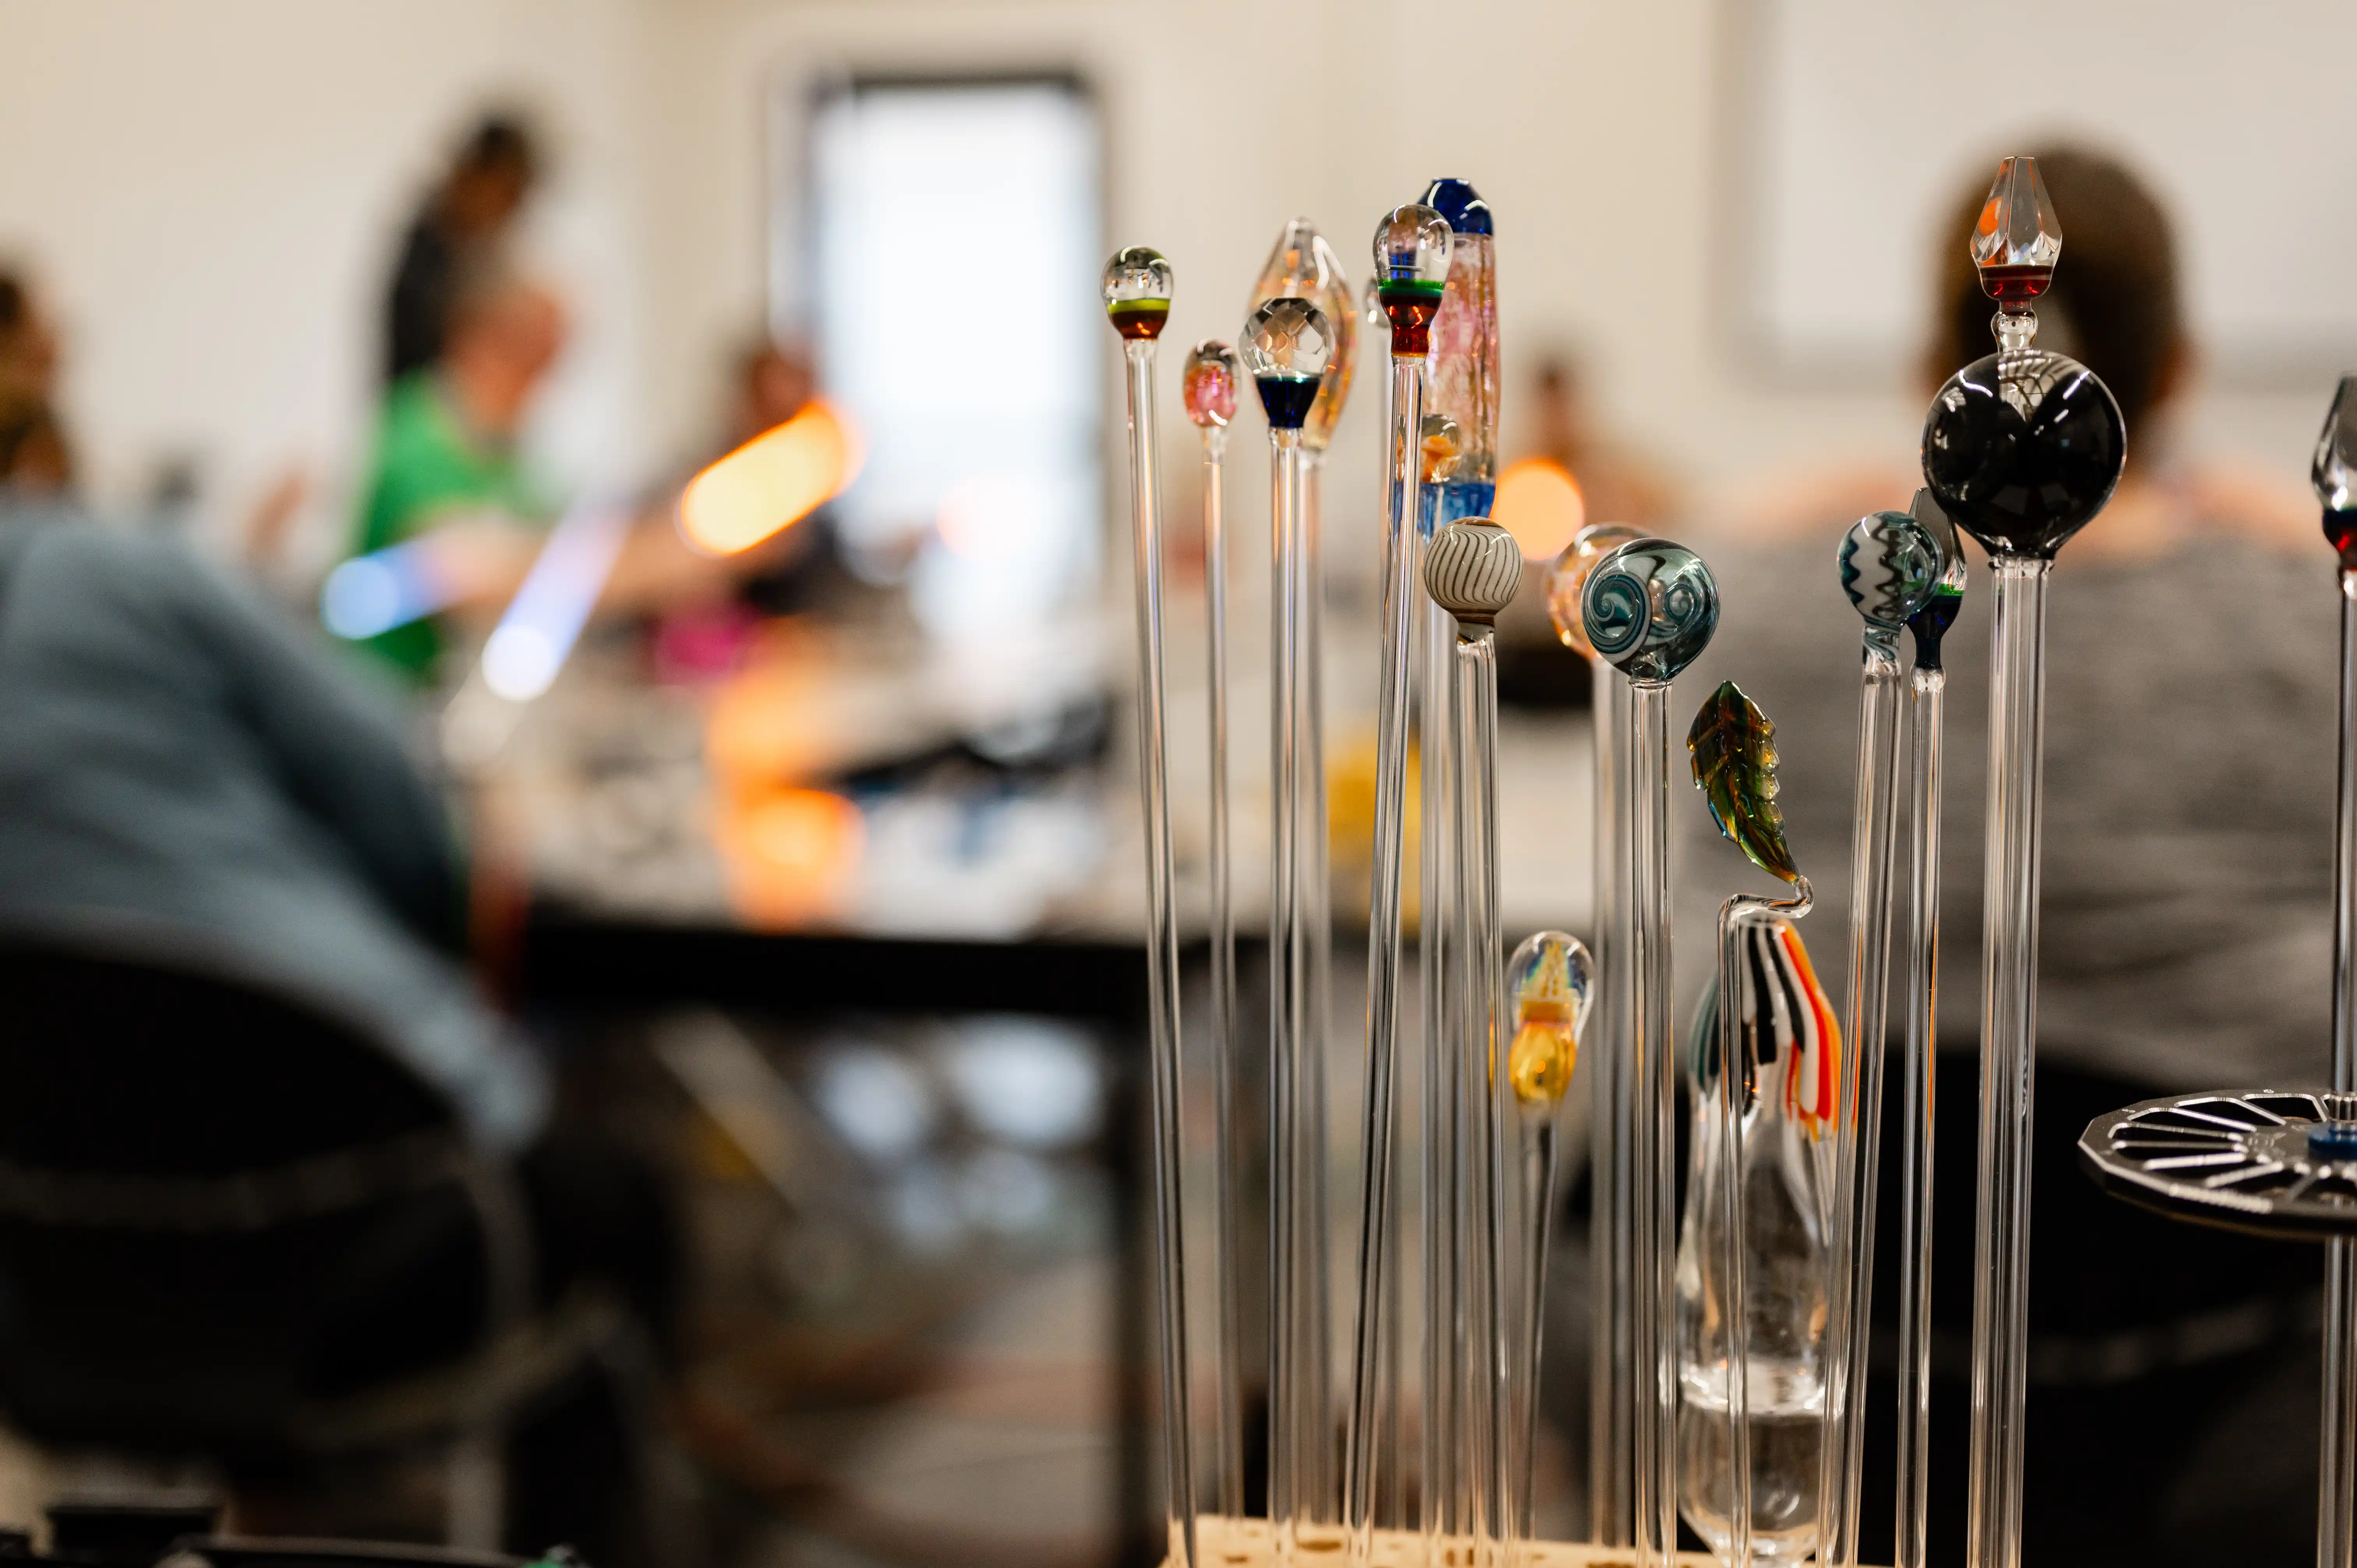 A collection of glass blowing tools with colorful ends on display with a blurred background of a glass blowing workshop and people working.